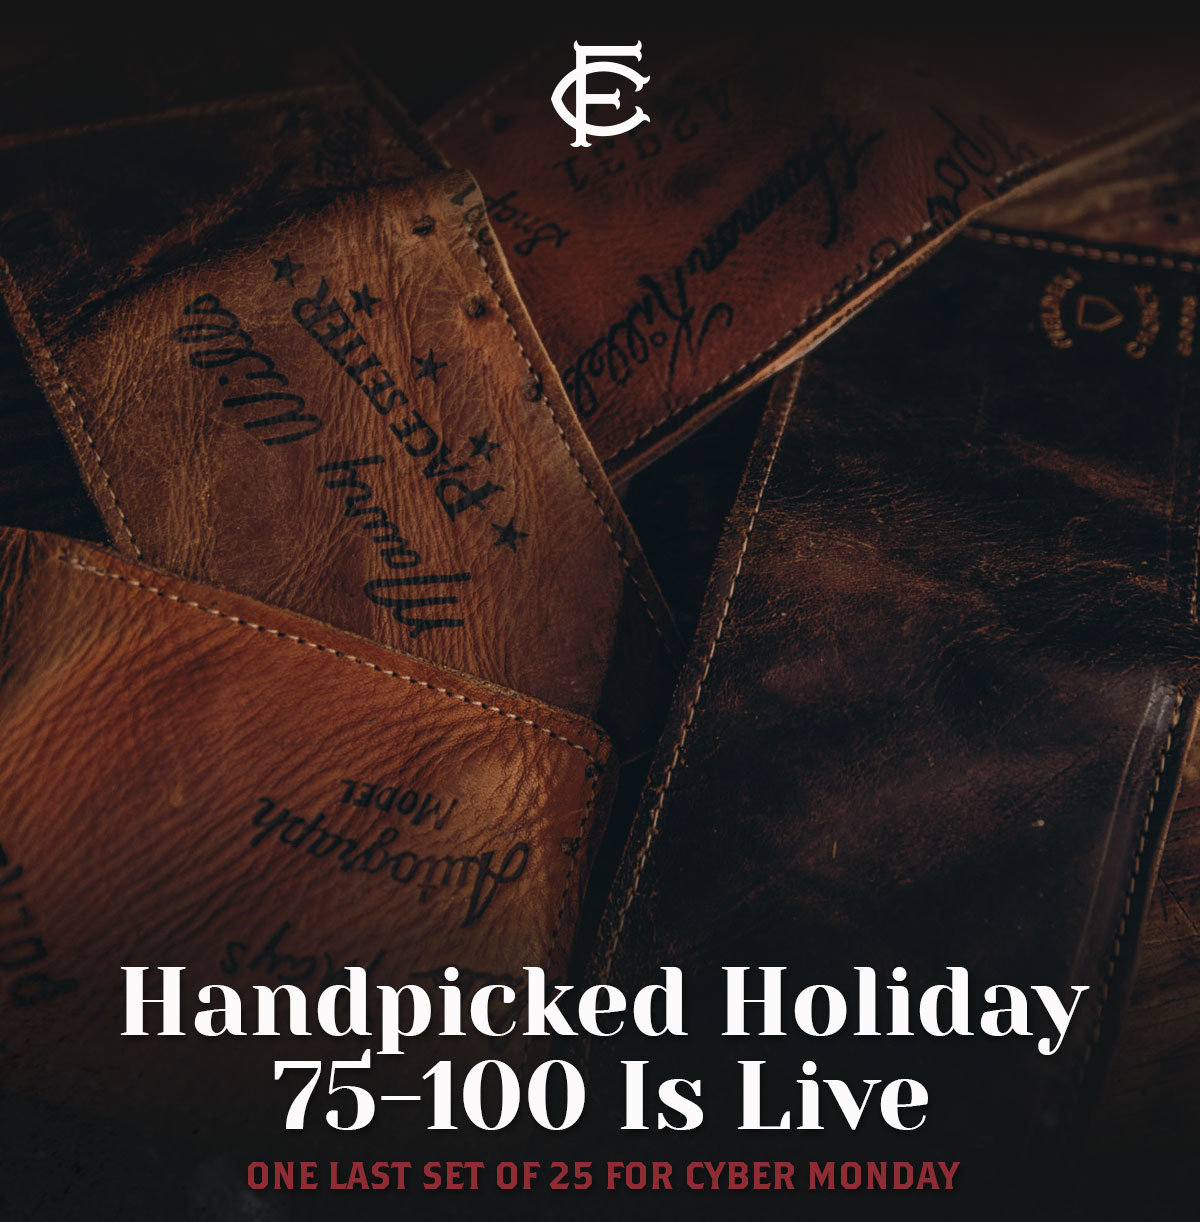 Handpicked Holiday 75-100 Is Live